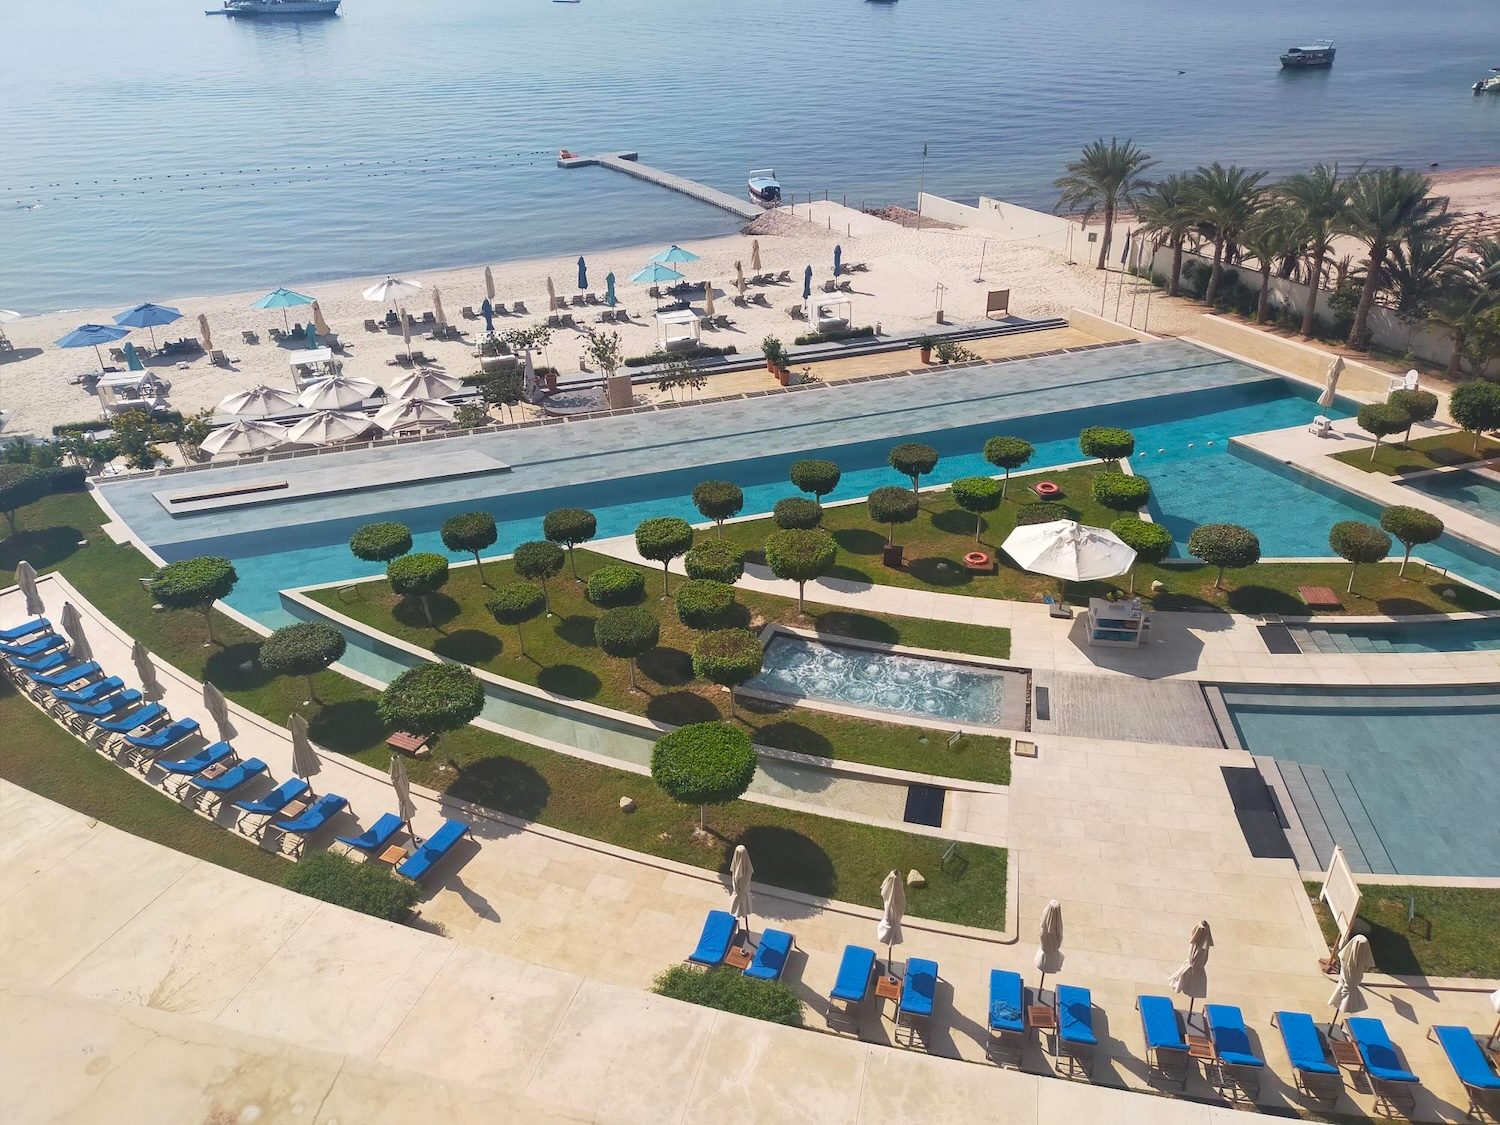 Sunbeds lie empty around the pool at the Kempinski hotel in Aqaba